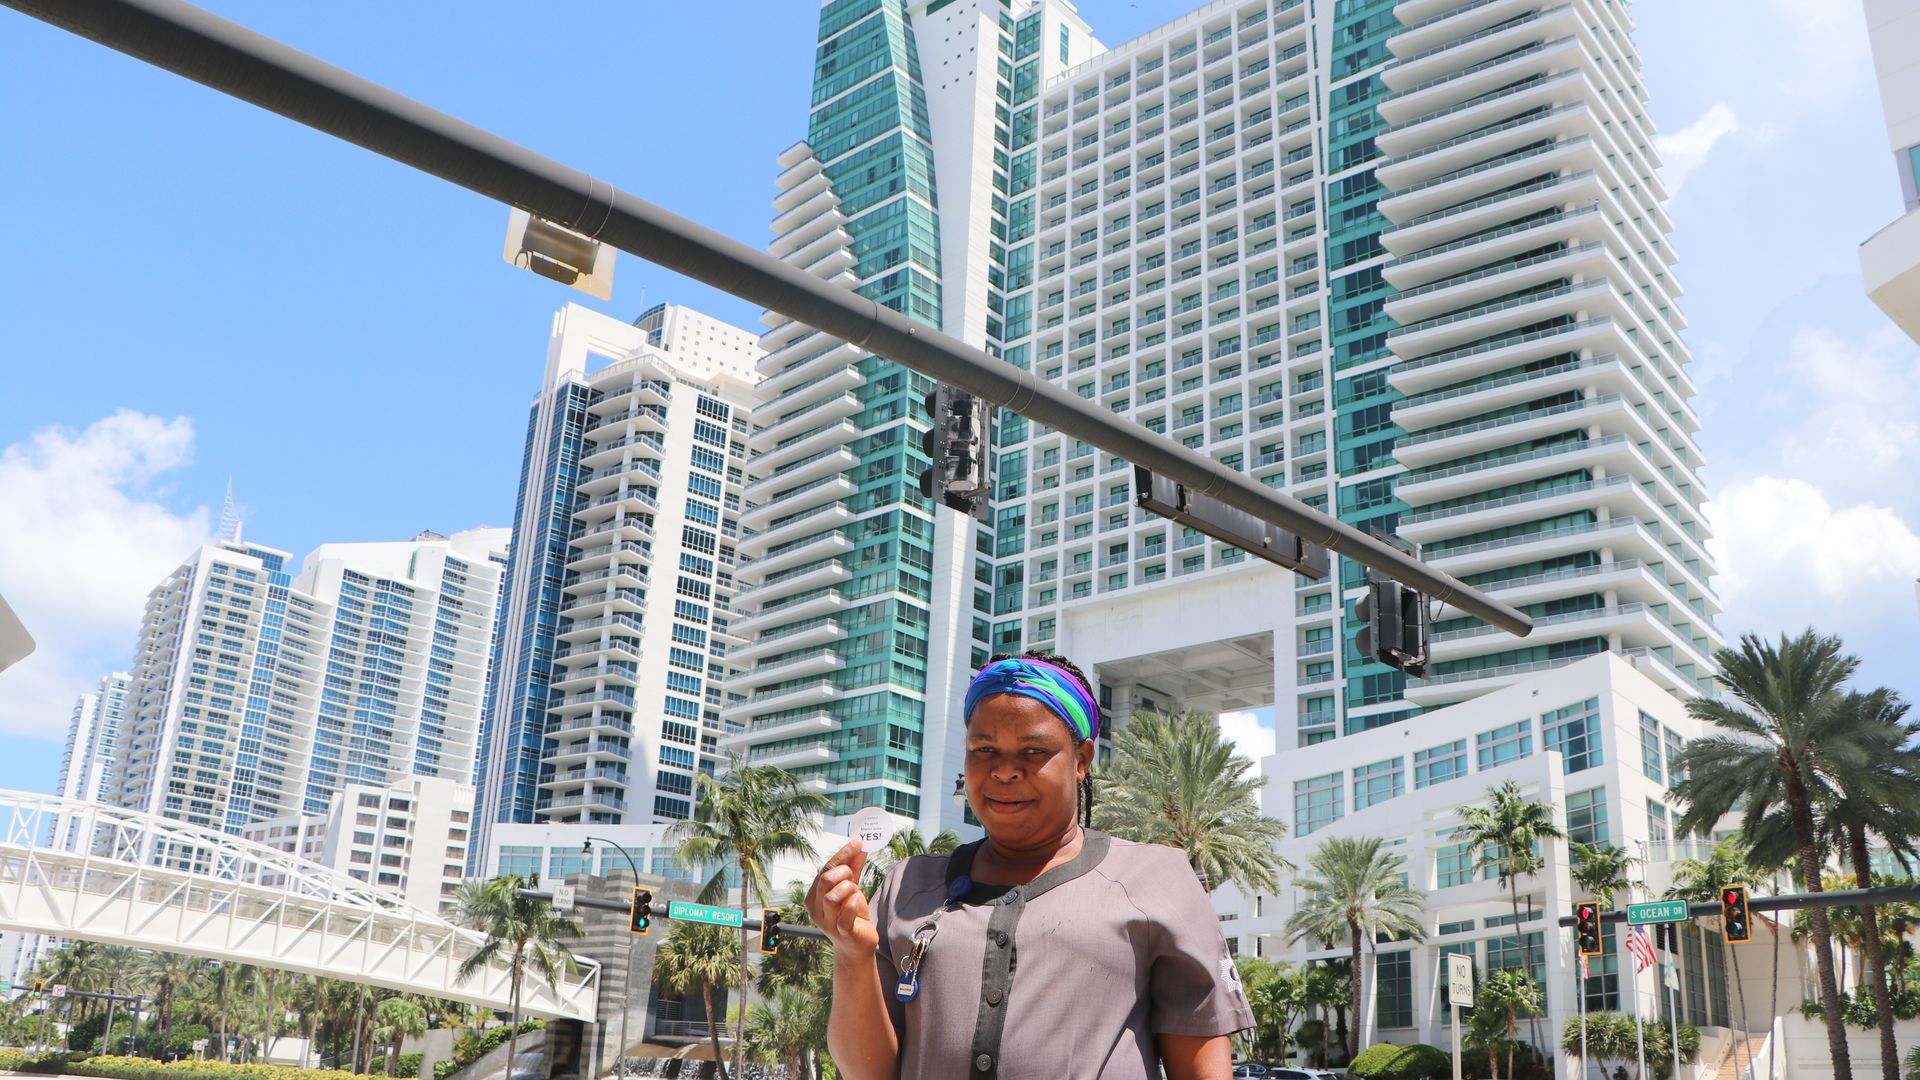 A worker in a gray uniform stands in front of the white and turquoise Diplomat Resort.